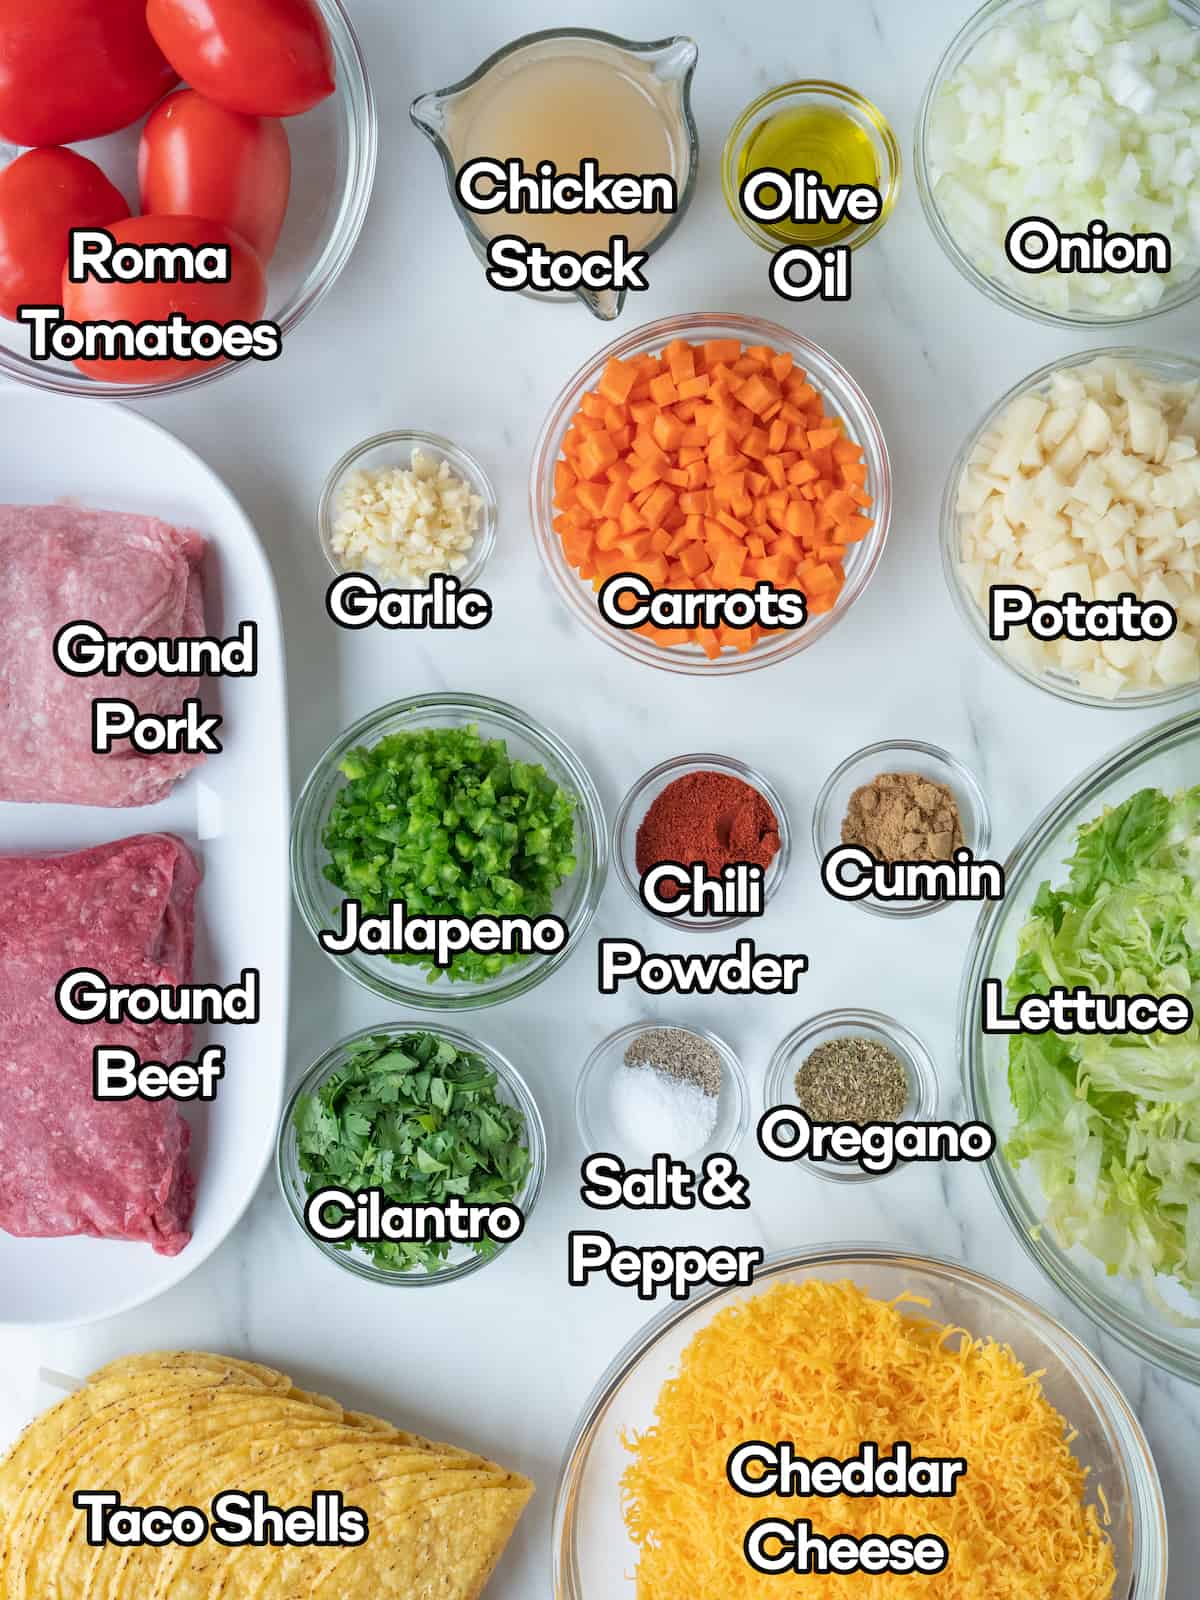 Mise-en-place of all the ingredients required to make picadillo tacos.